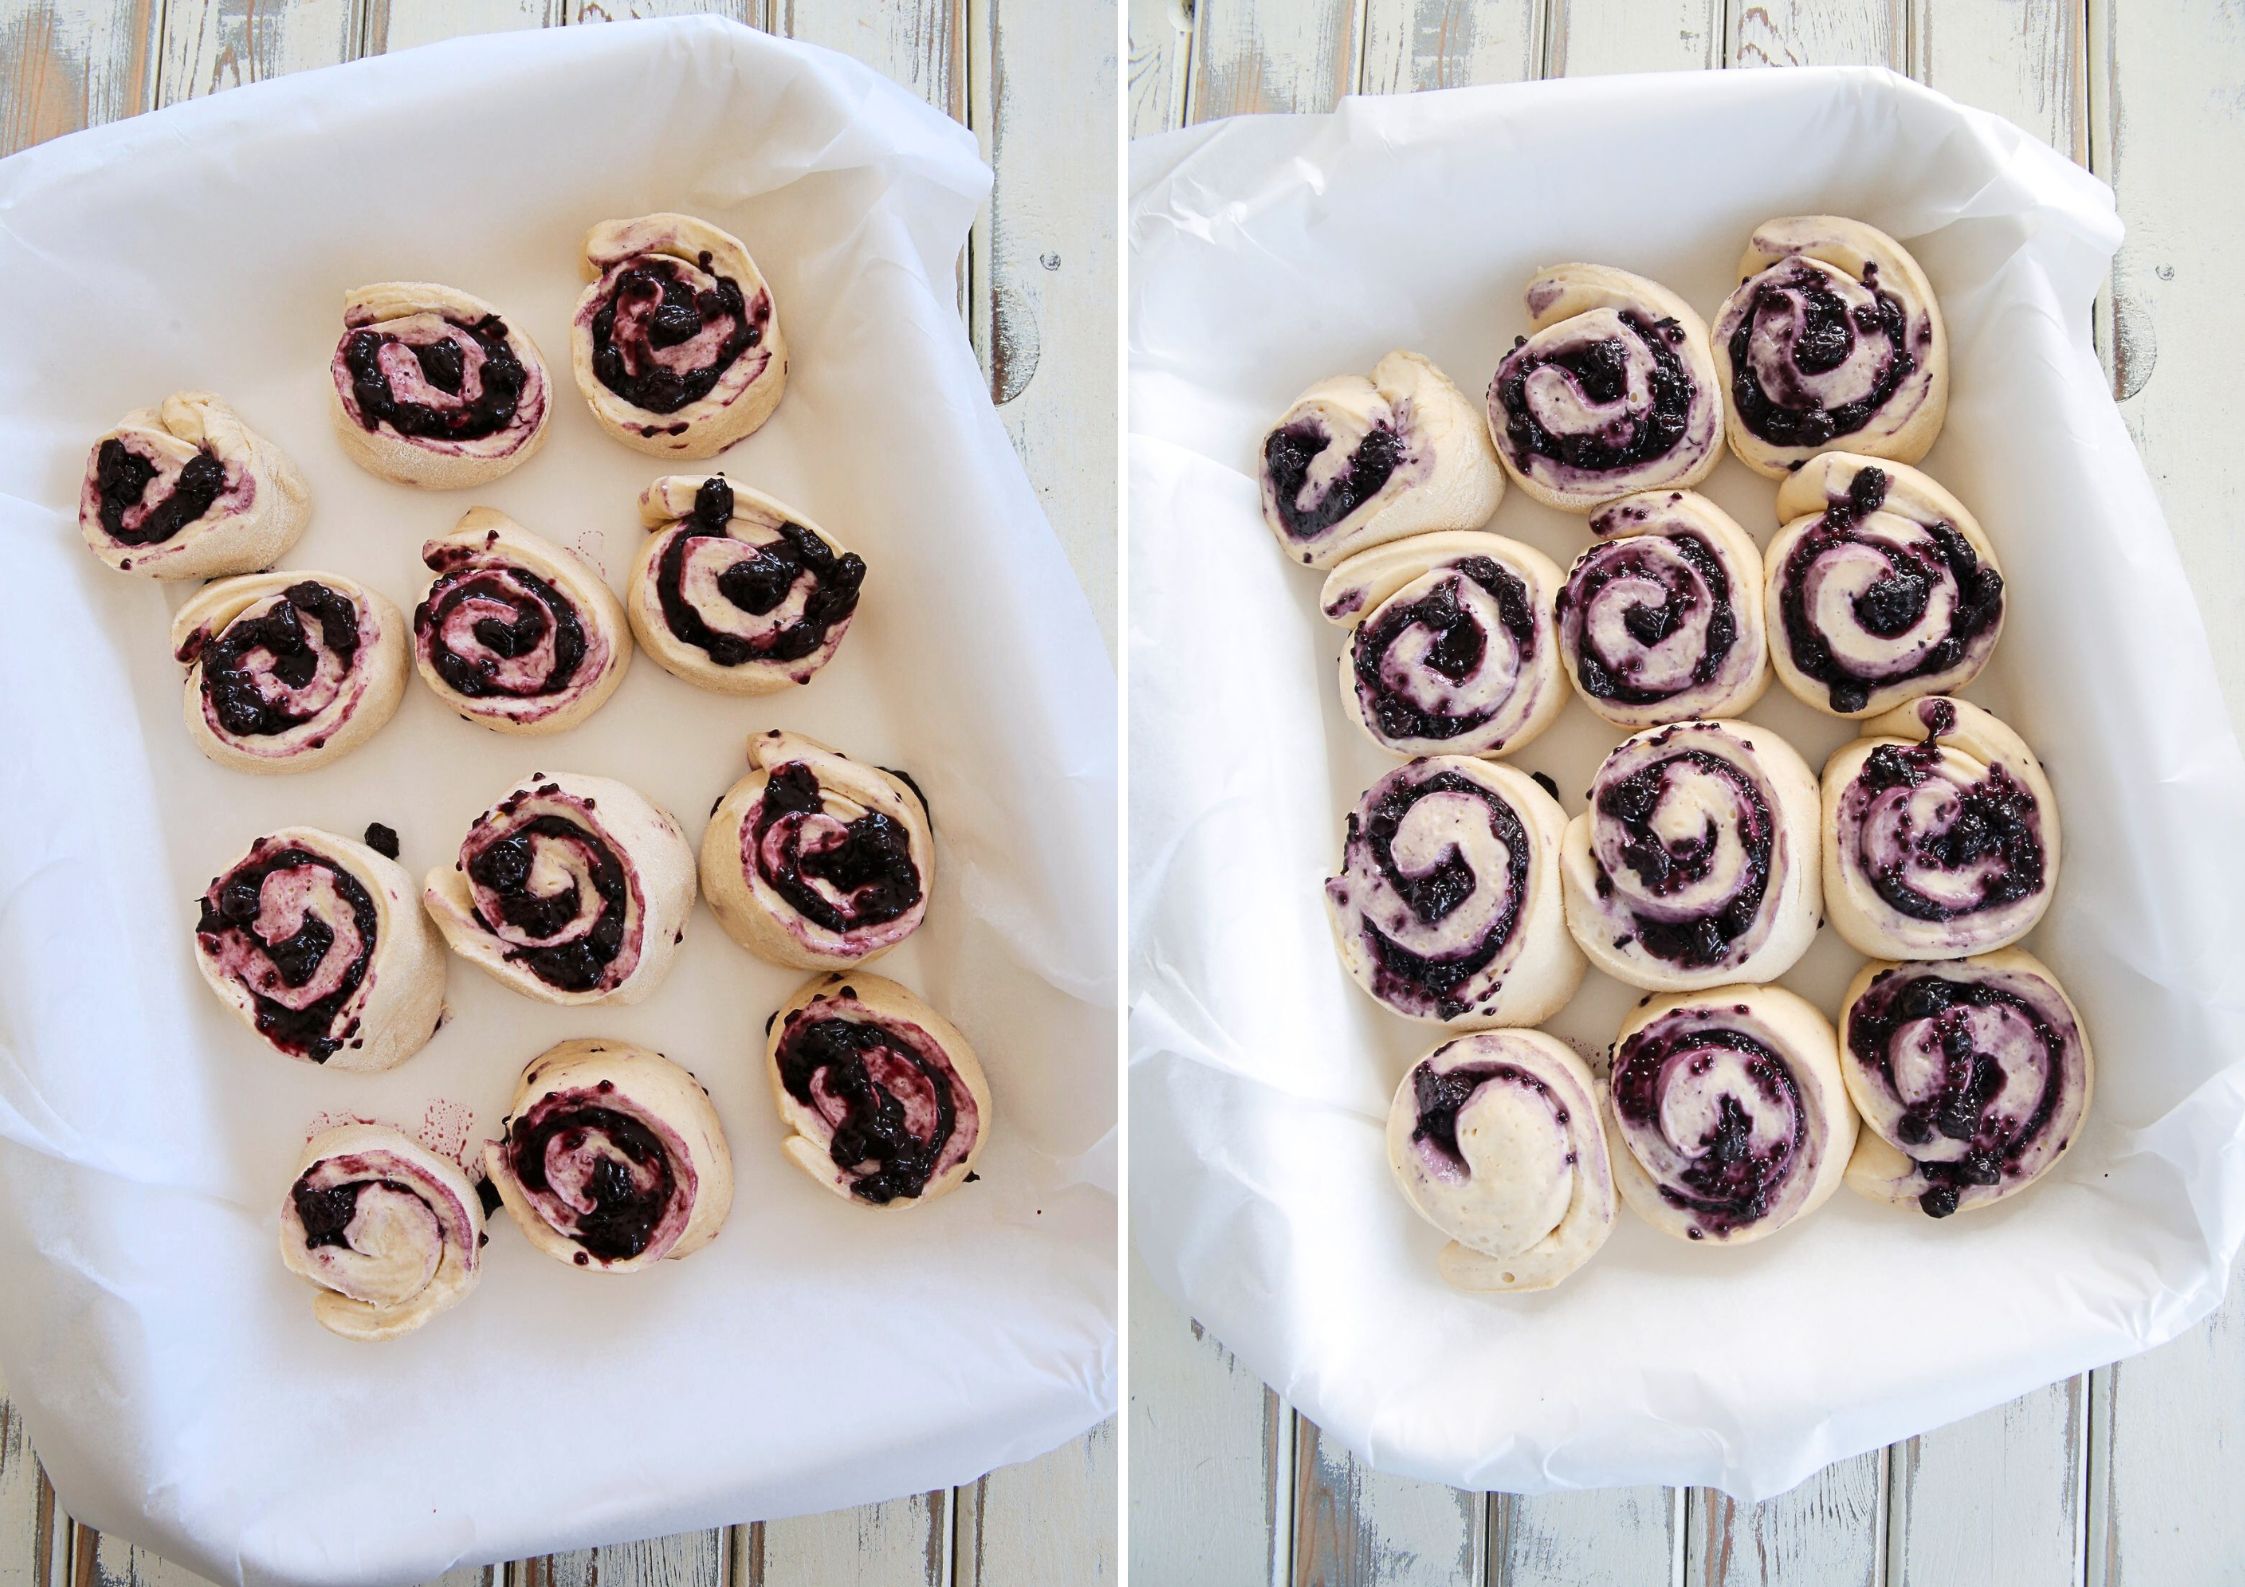 These blueberry jam sweet rolls are absolutely bursting with fruity, sweet, jammy flavour! The soft fluffy dough is swirled with the easiest homemade blueberry jam then baked to golden perfection before being topped with a vegan cream cheese frosting. Utterly delicious! #blueberryrolls #blueberryjam #homemadebread #sweetrolls #blueberrysweetrolls